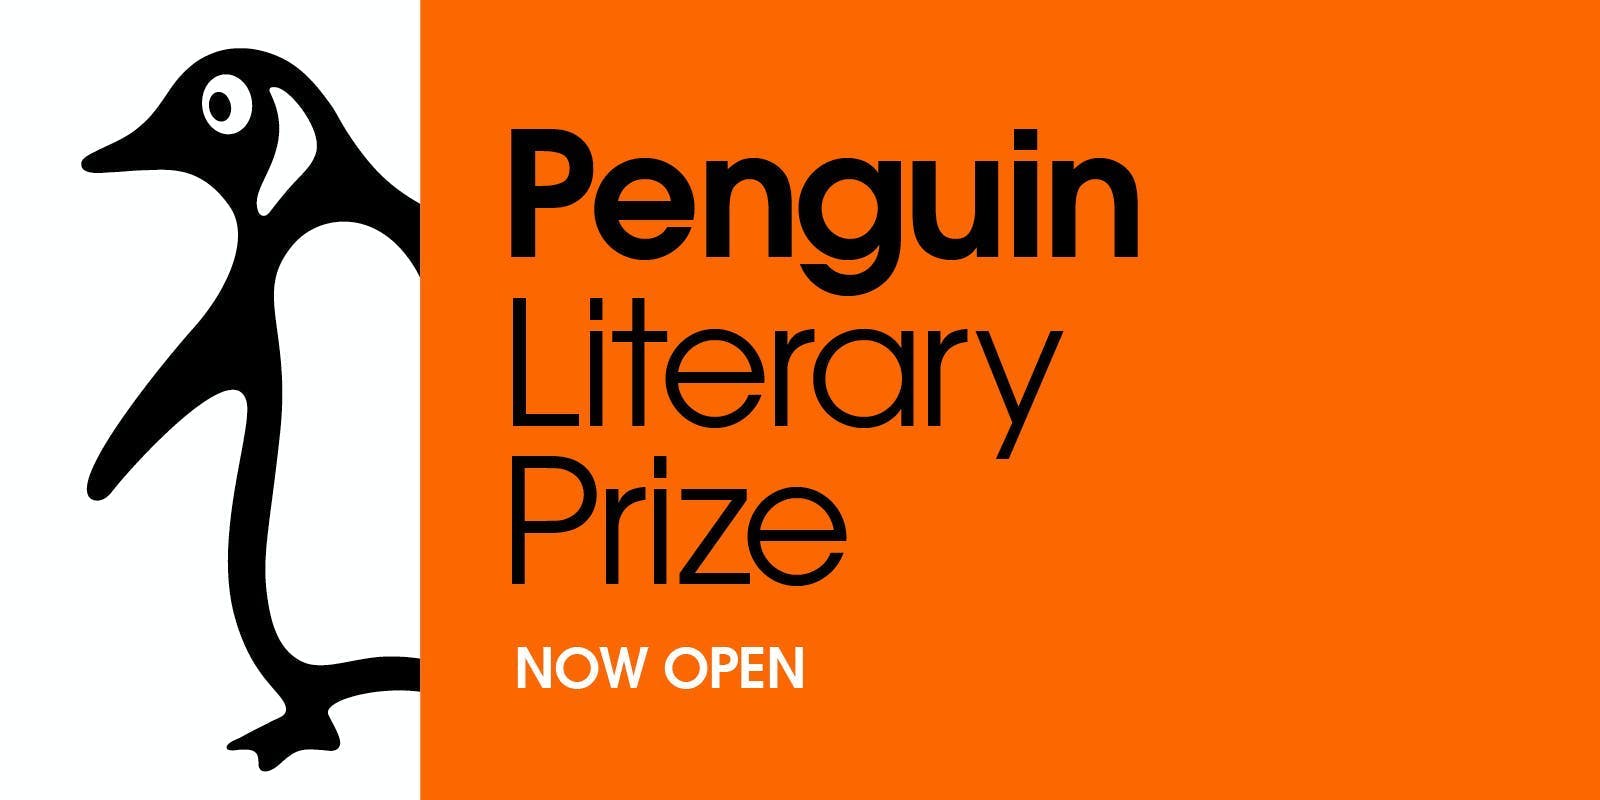 Submissions for the 20,000 Penguin Literary Prize 2024 now open